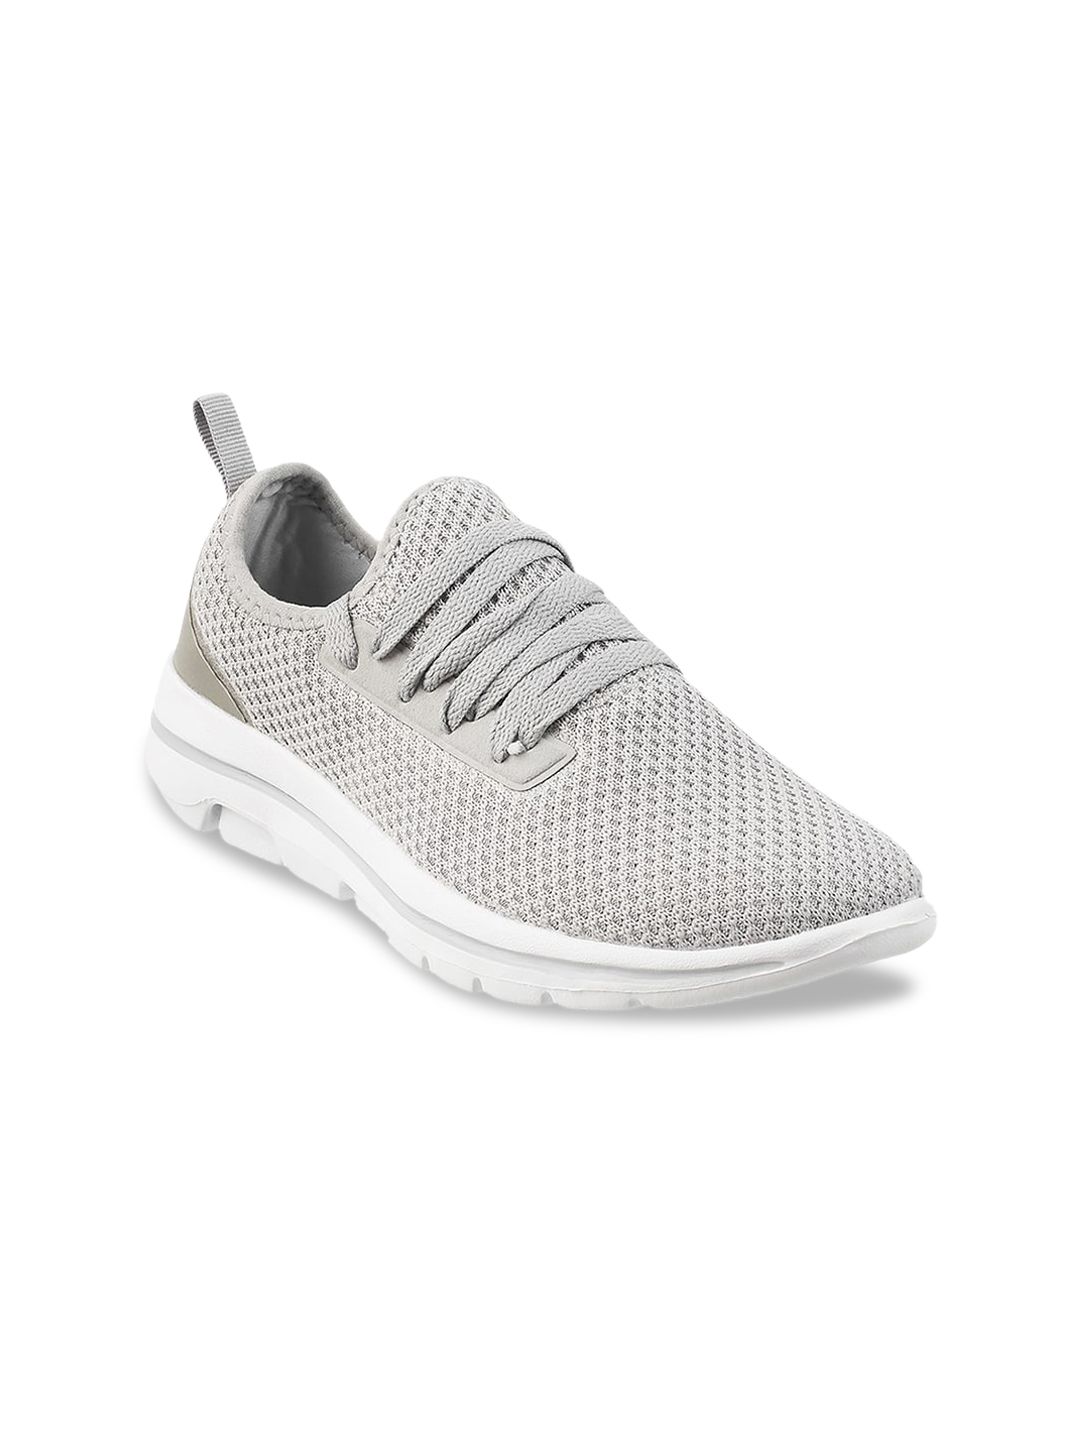 ACTIV Women Grey Woven Design Synthetic Sneakers Price in India